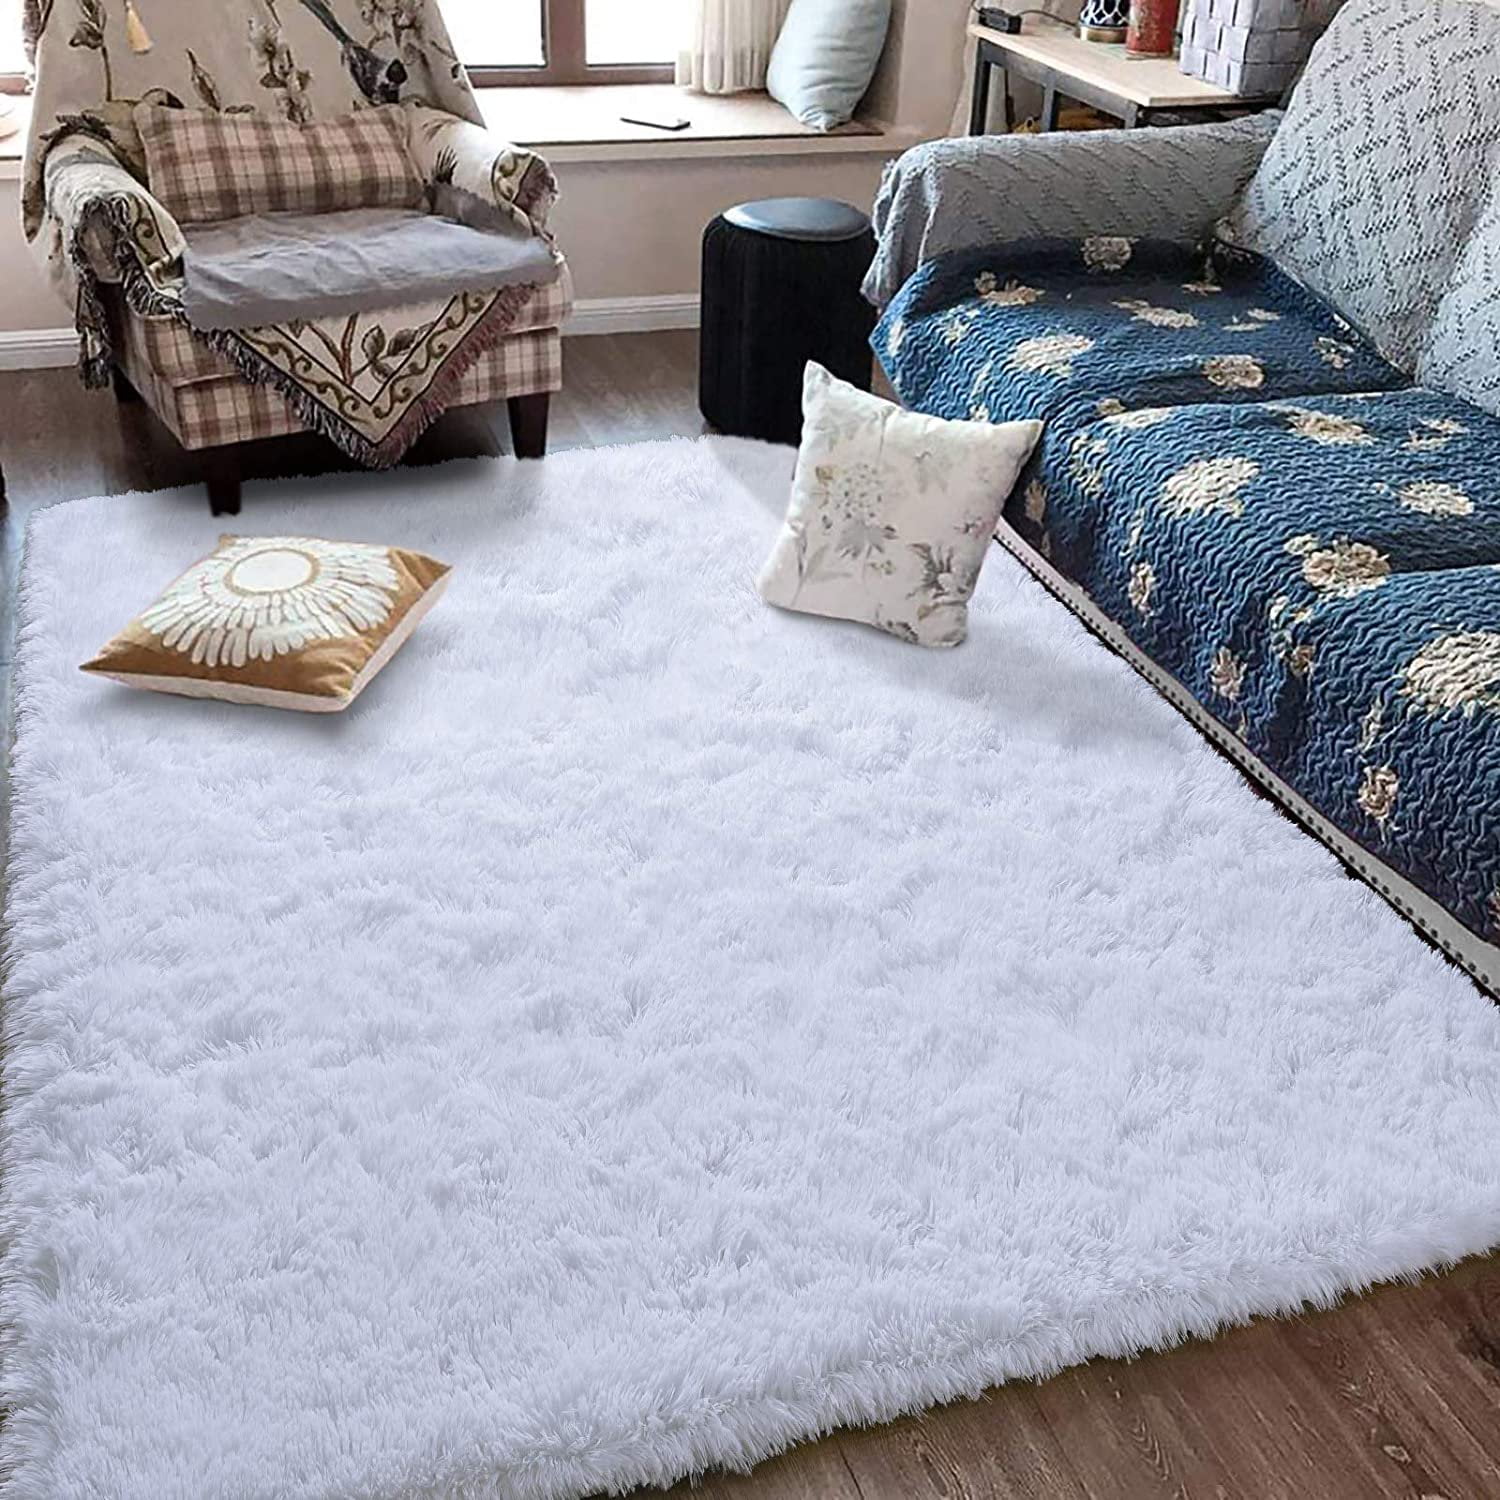 Shaggy Area Rugs for Living Room Bedroom Rug Modern Ultra Soft Fuzzy Throw  Carpets for Kids Girls Boys Pets Room Fluffy Rugs (2X3 Feet, Coffee)